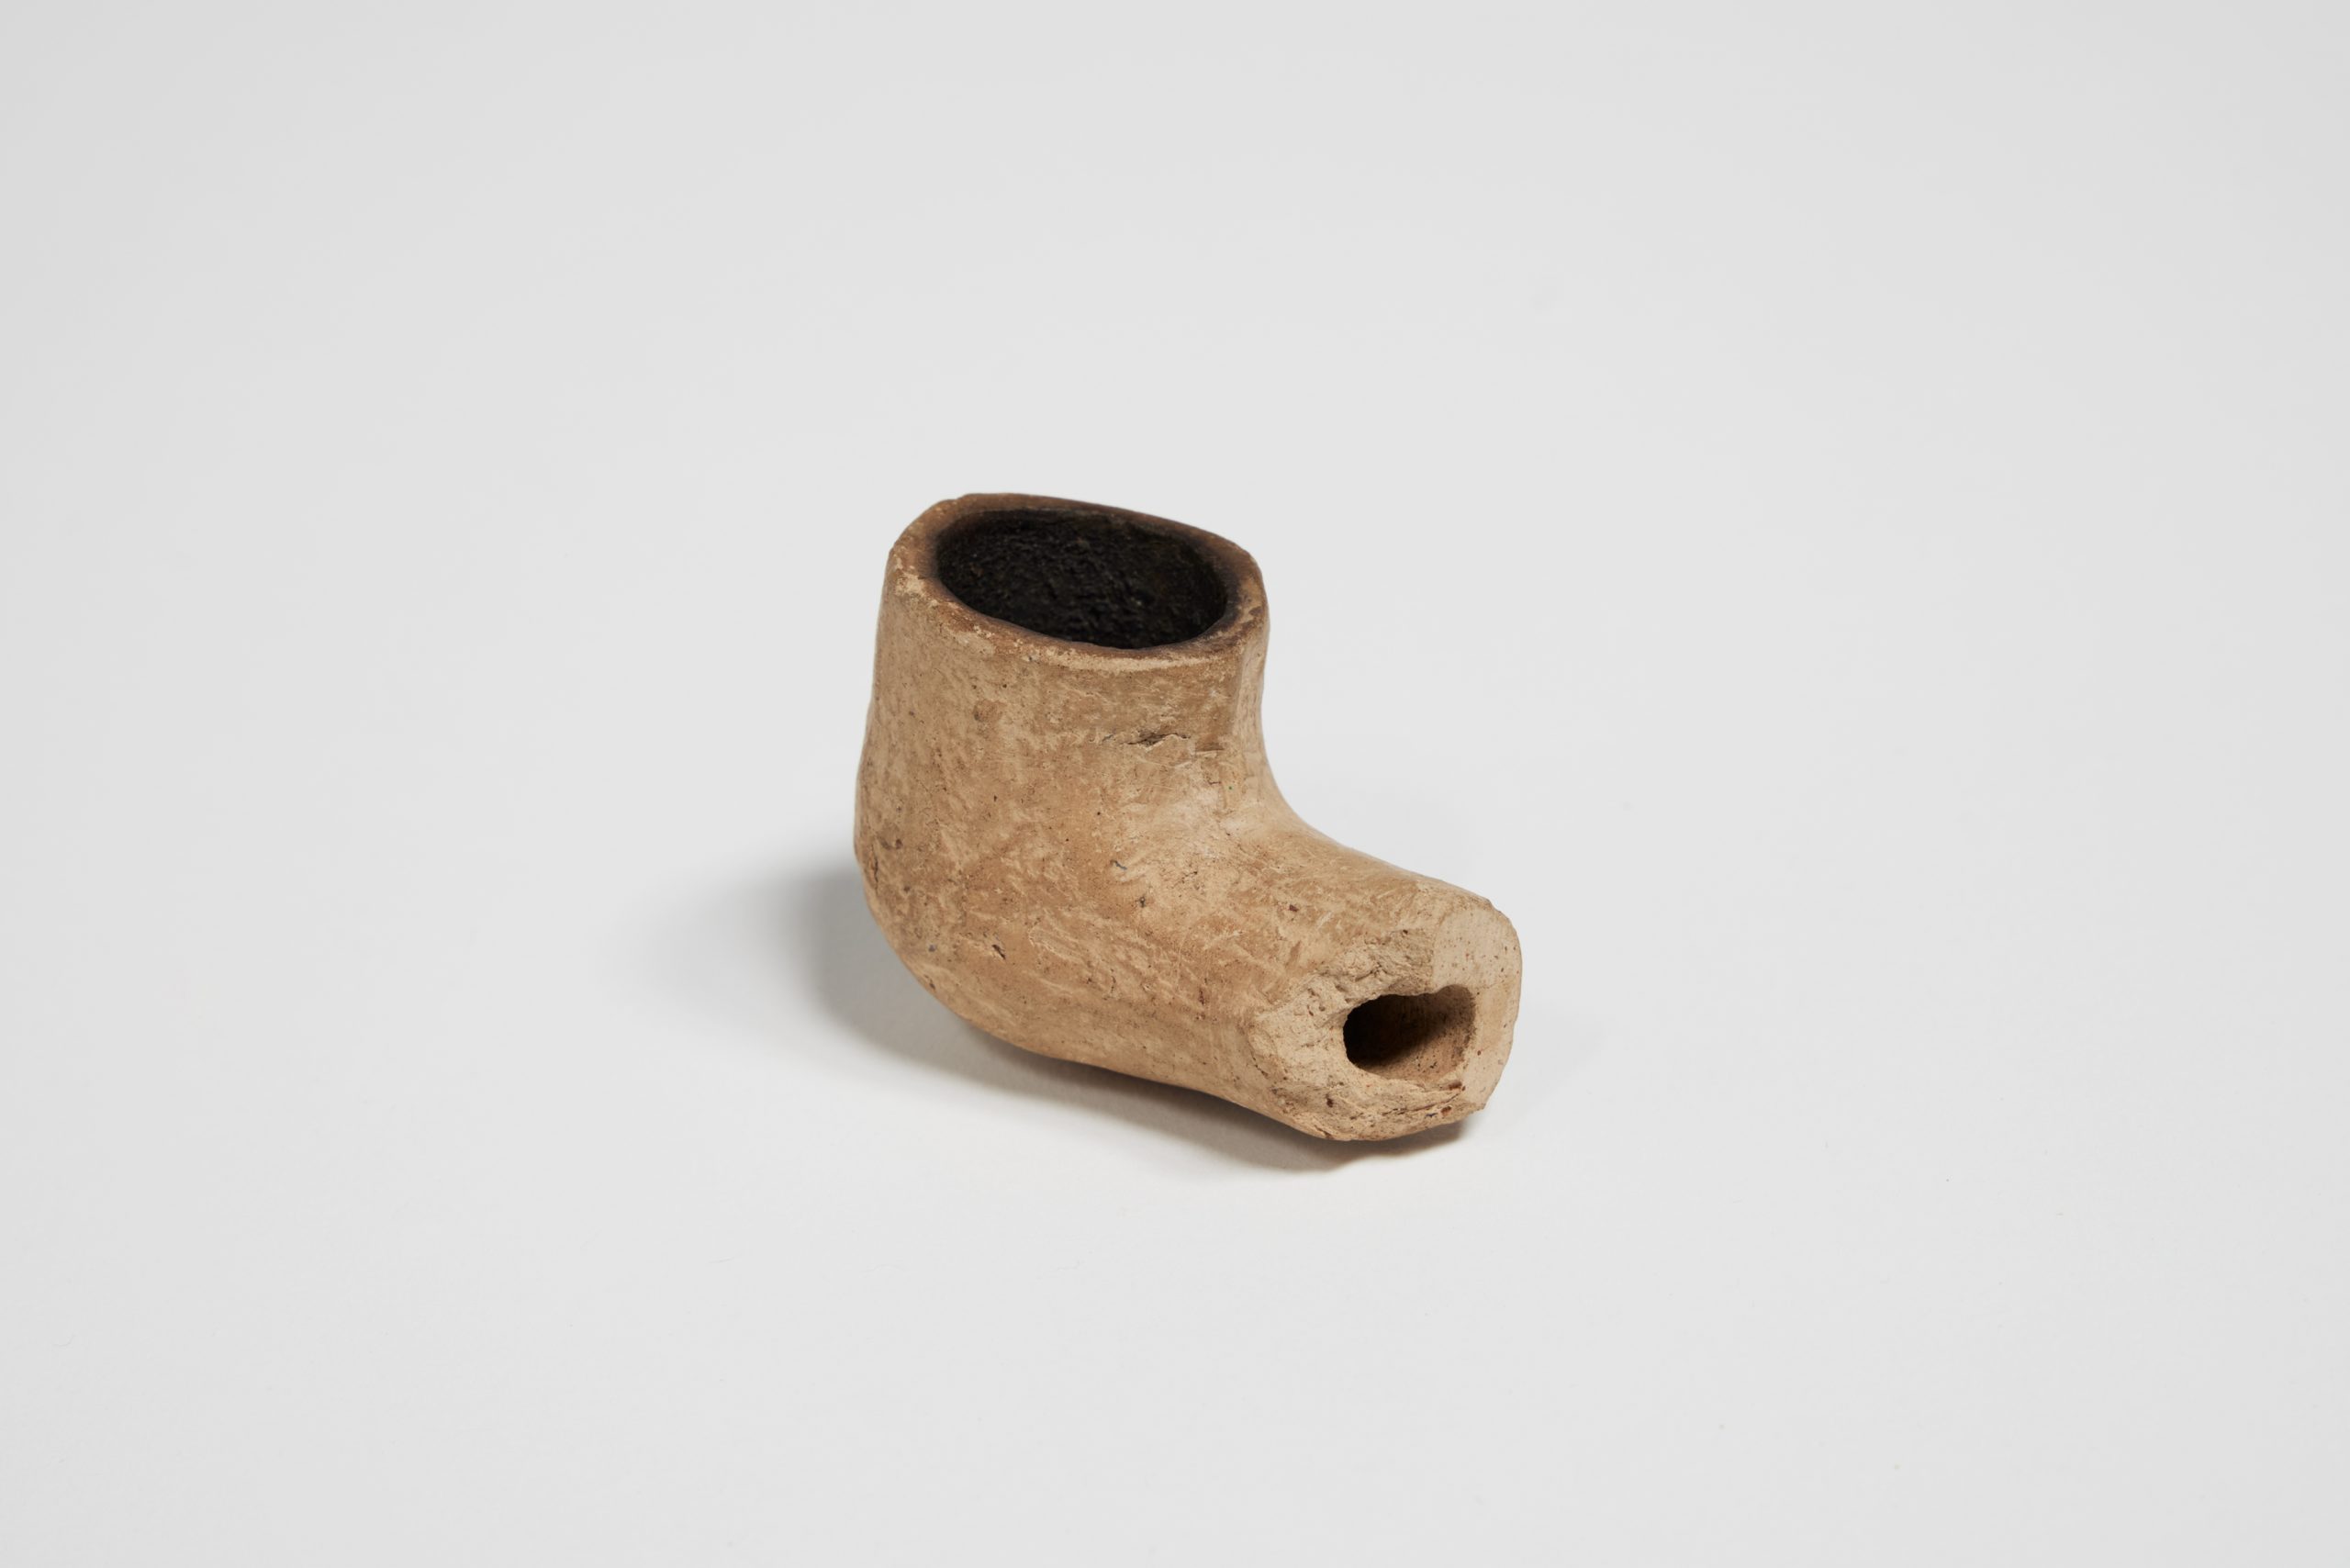 handmade clay pipe with the stem missing